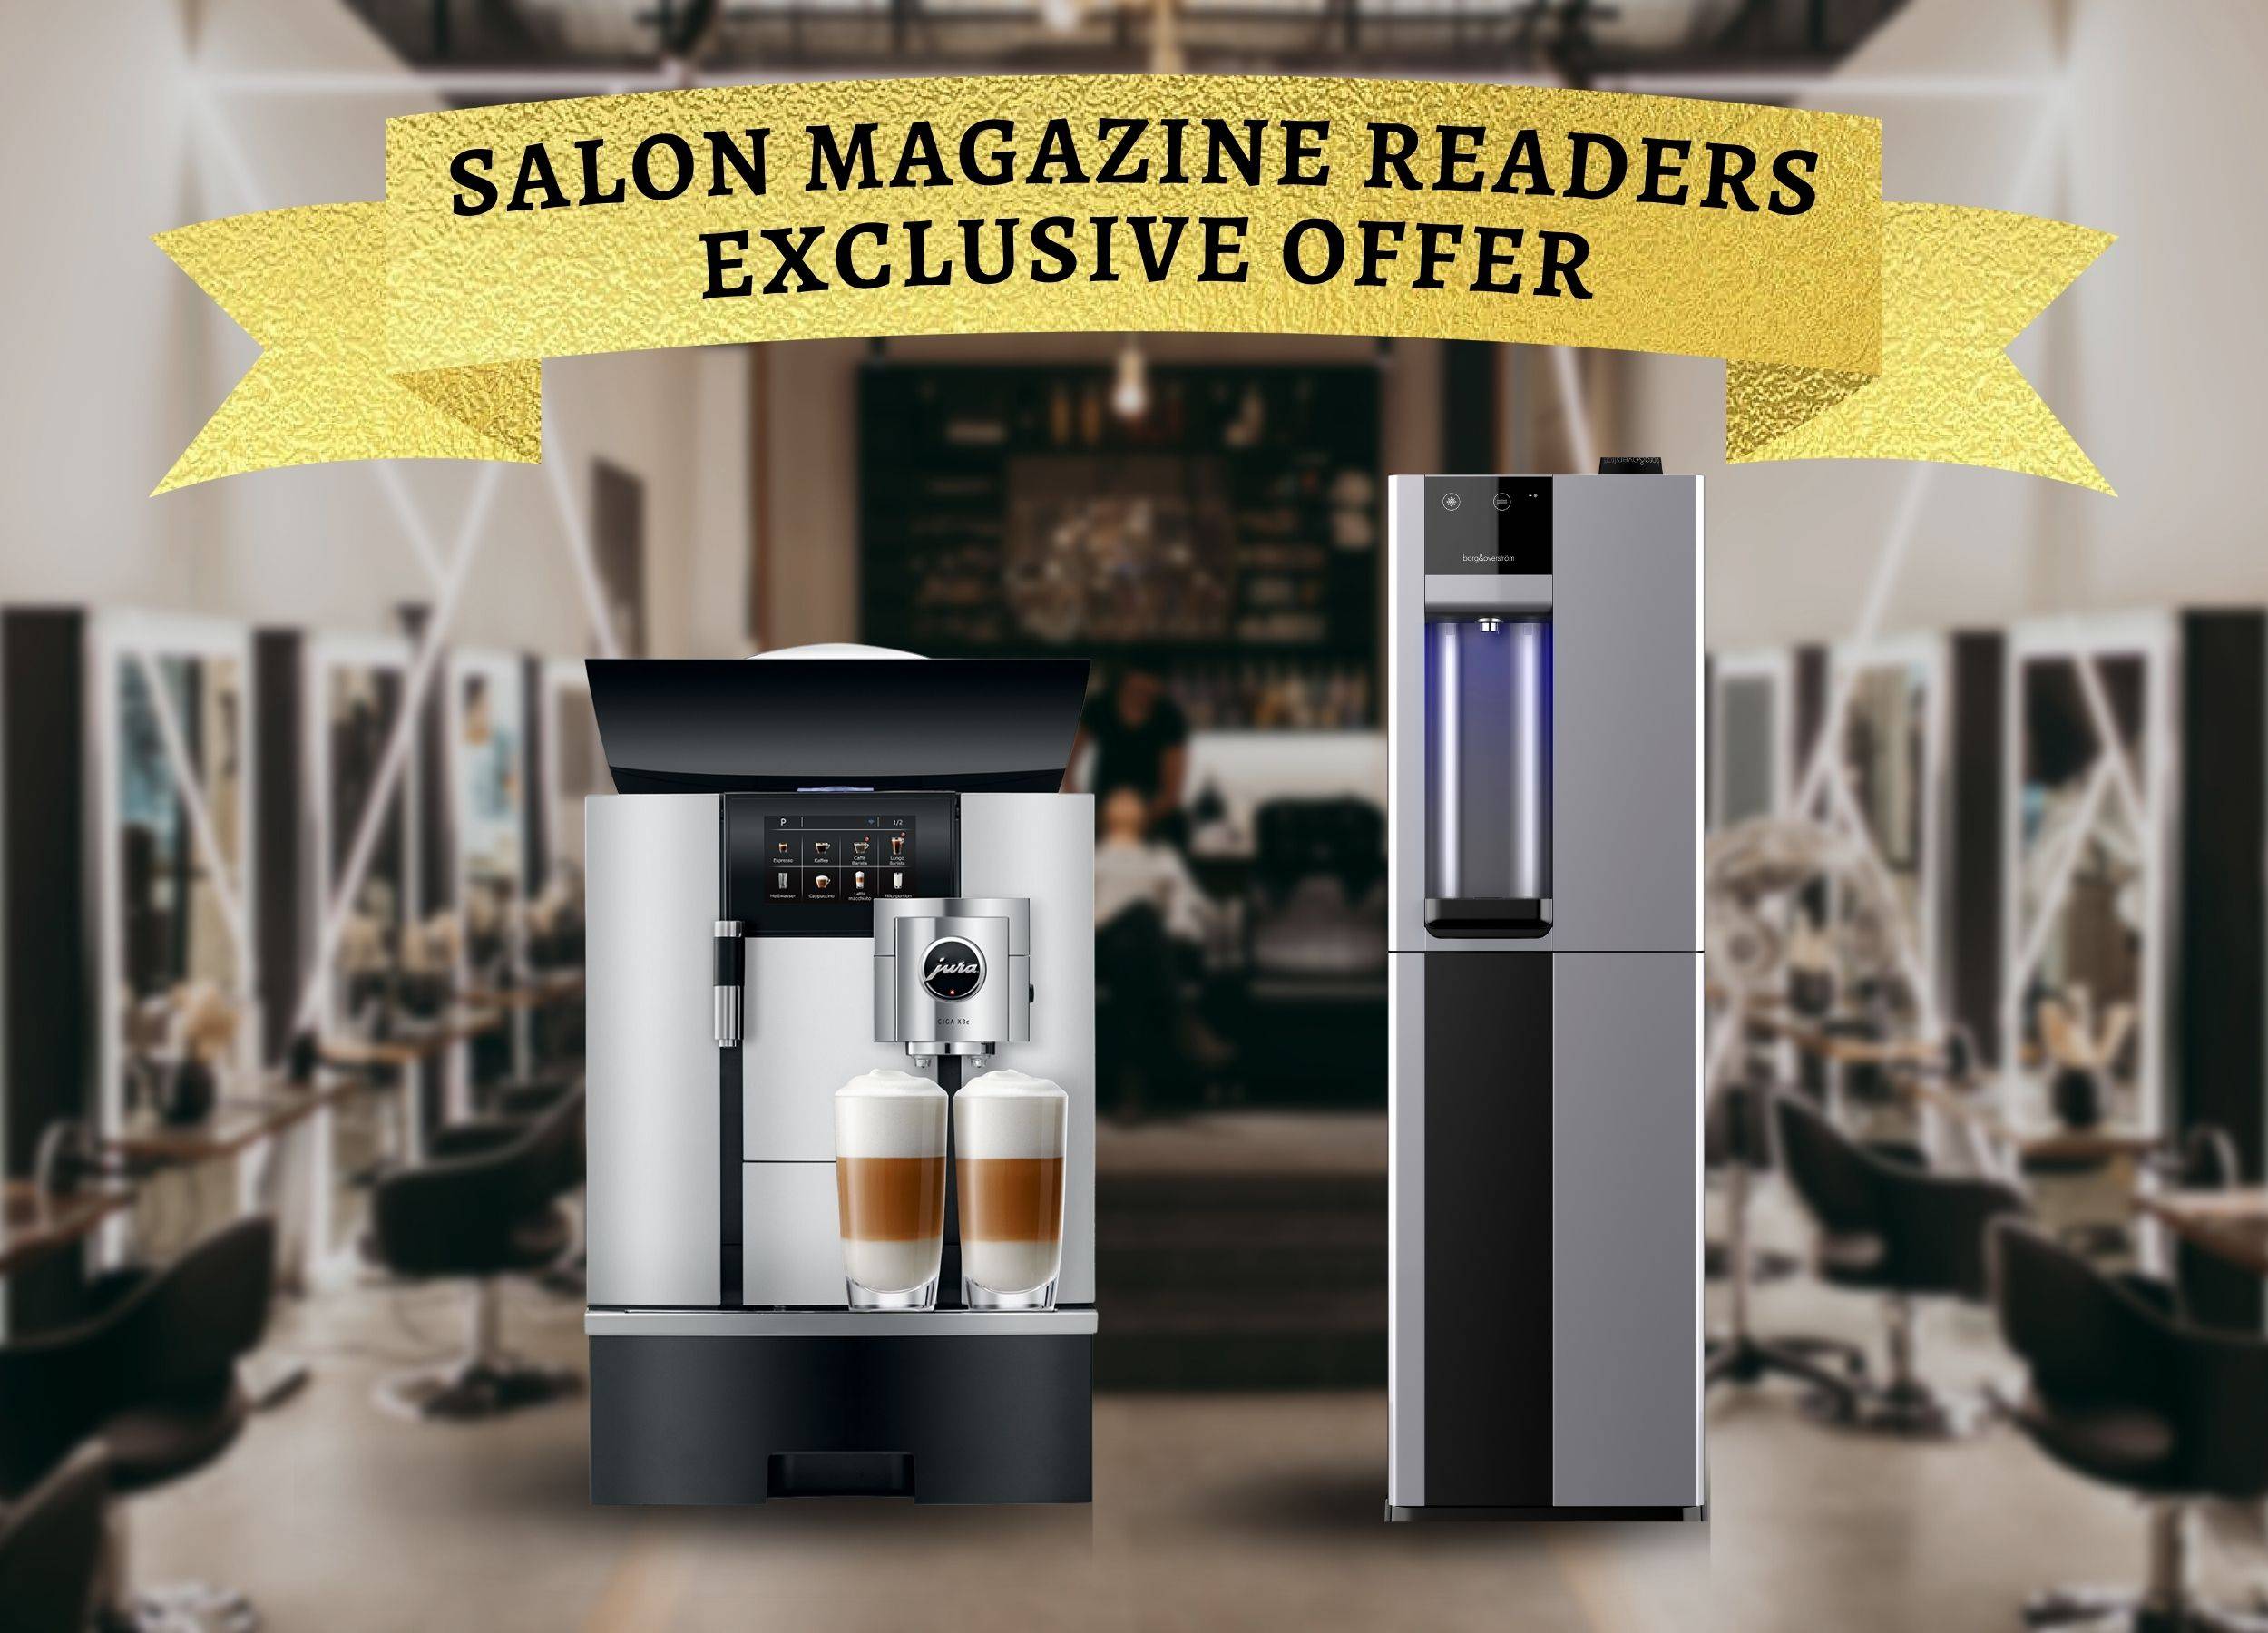 Salon Magazine readers exclusive offer - image of coffee machine and water machine with a salon in the background